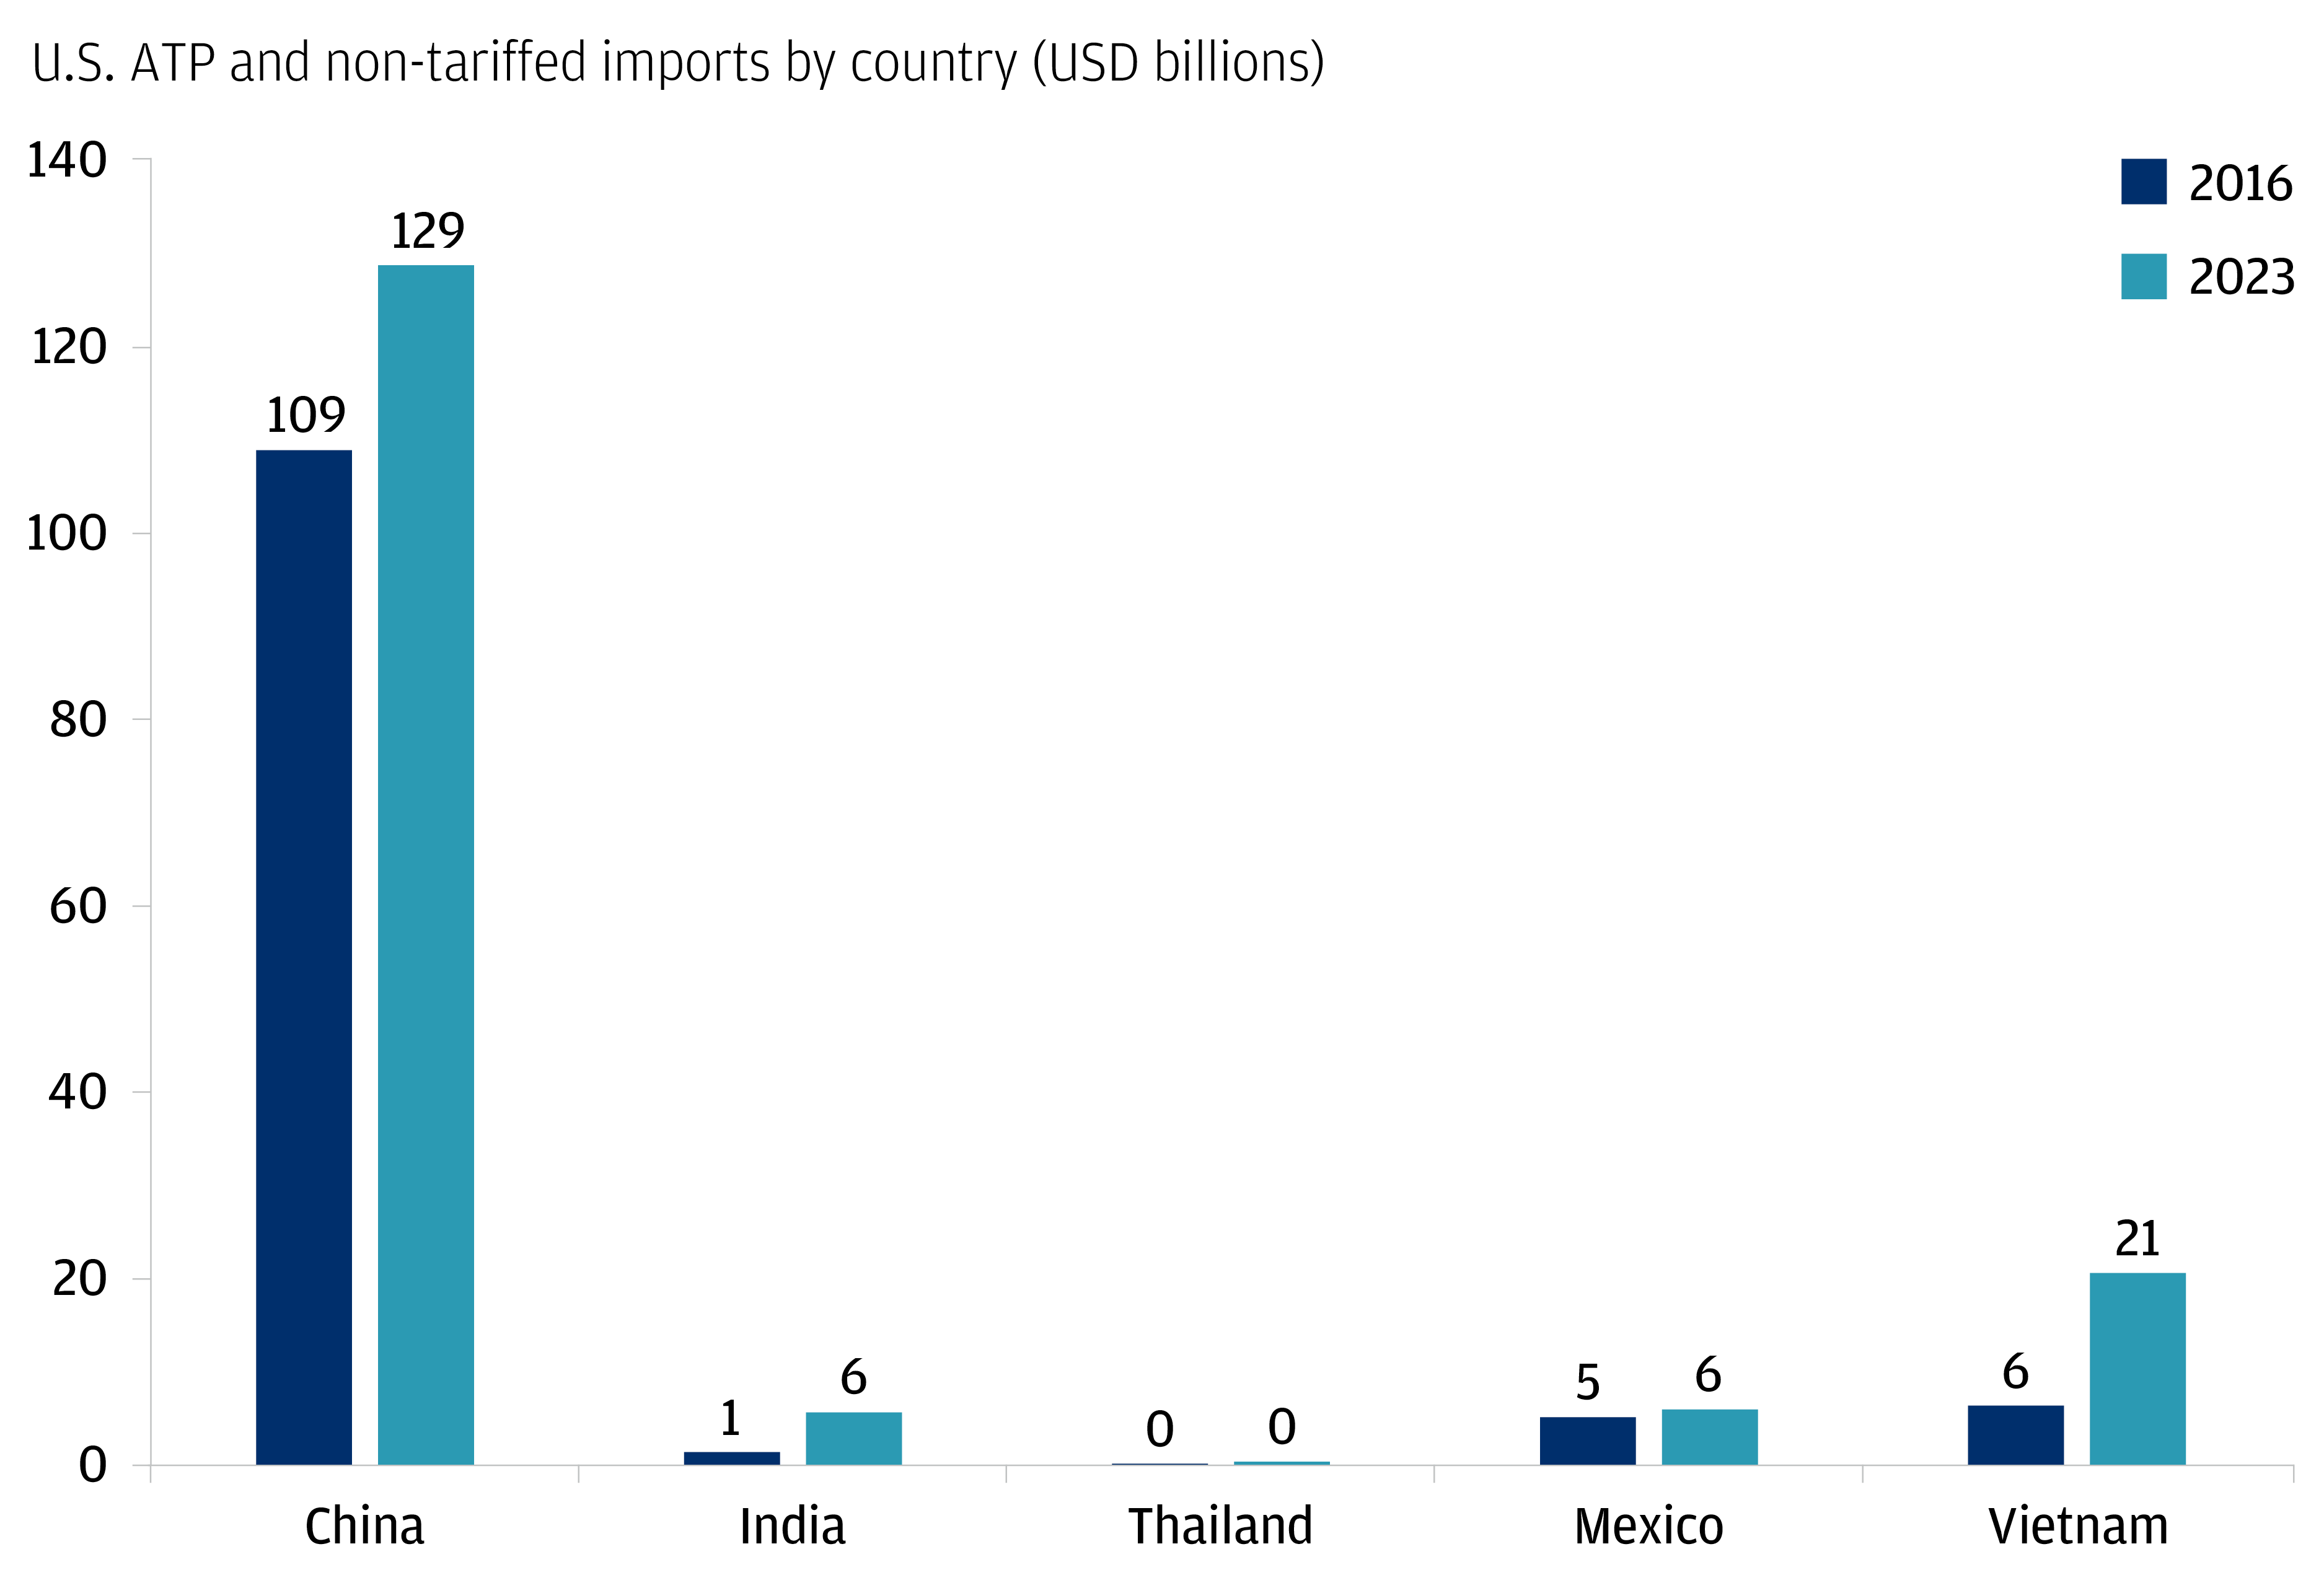 The chart describes the U.S. non-tariffed Advanced Technology Products imports by country in USD billion.